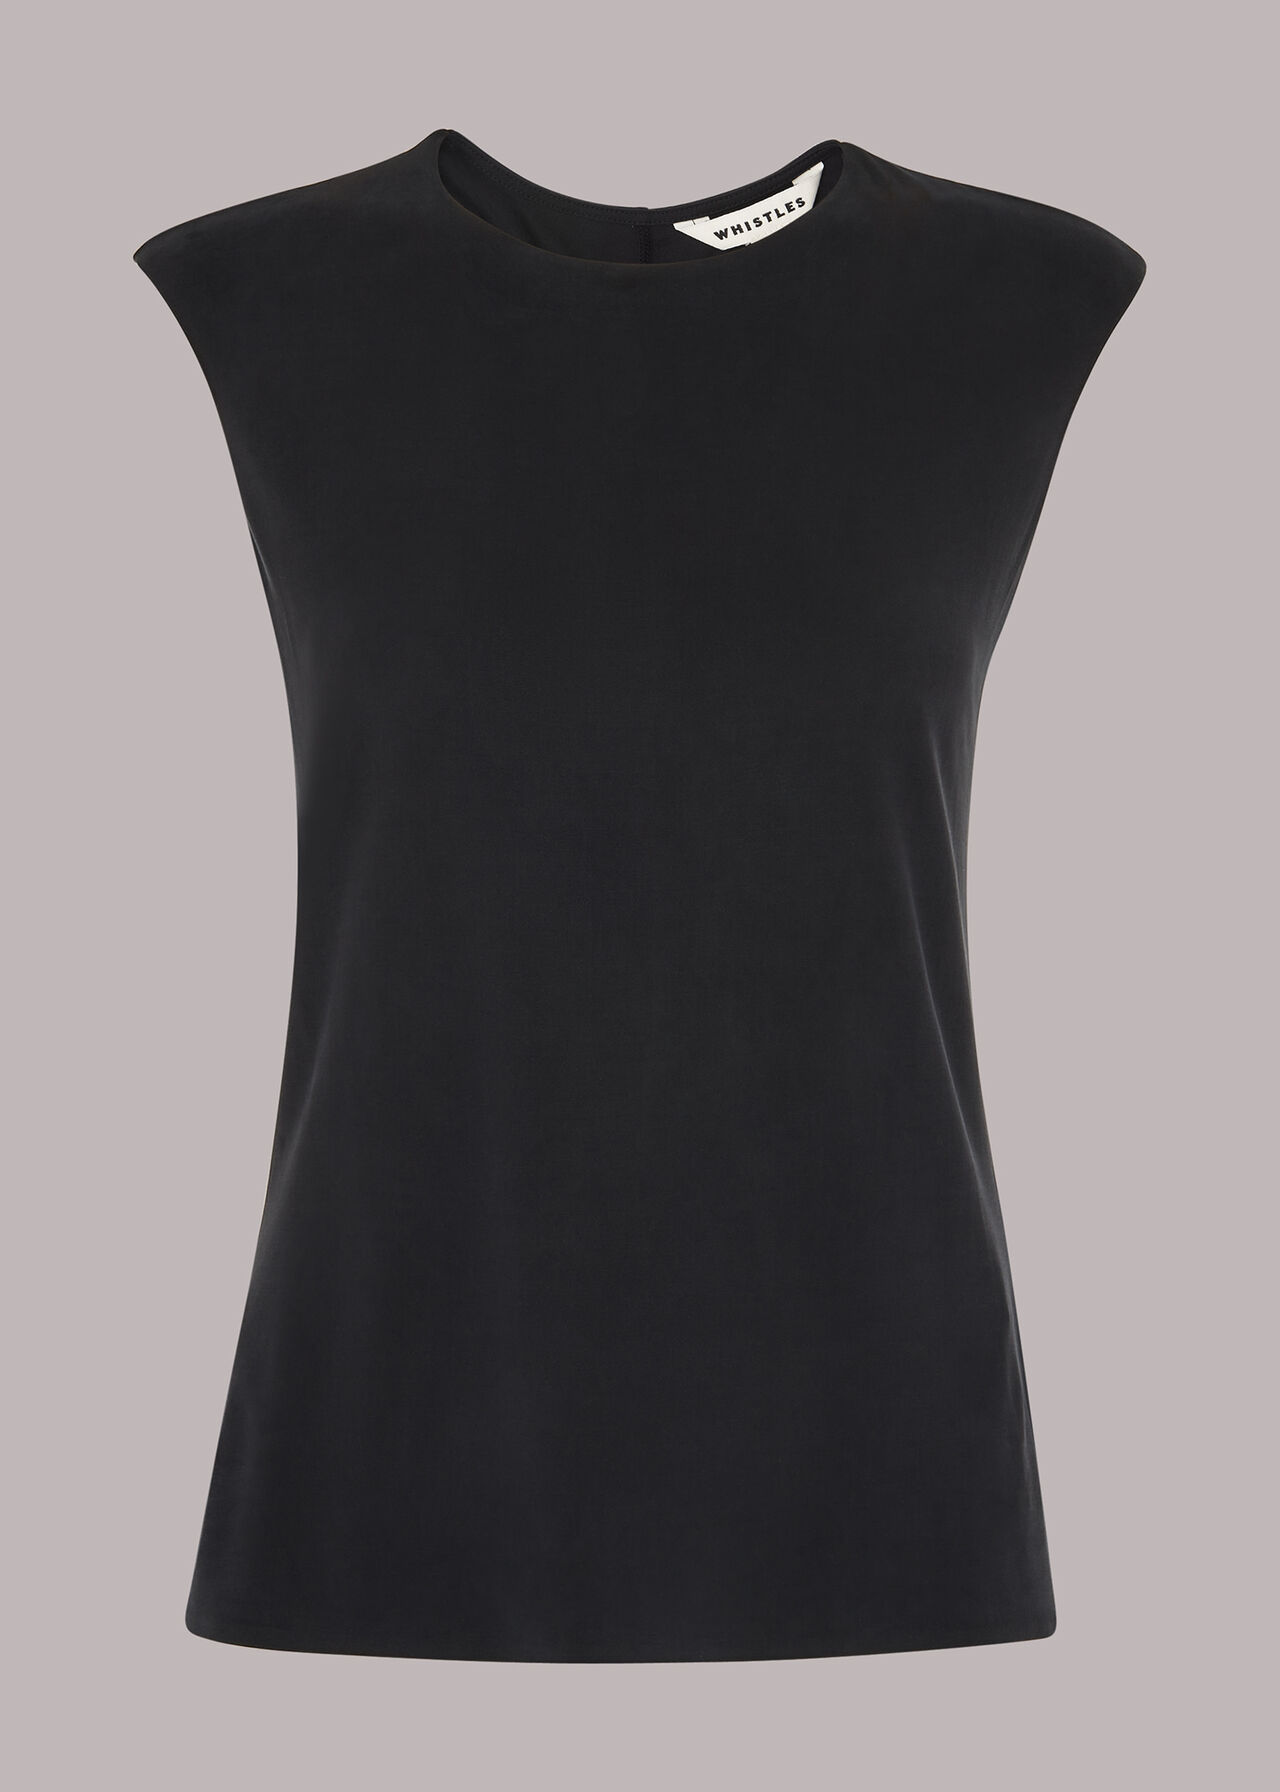 Keyhole Cut Out Cupro Top